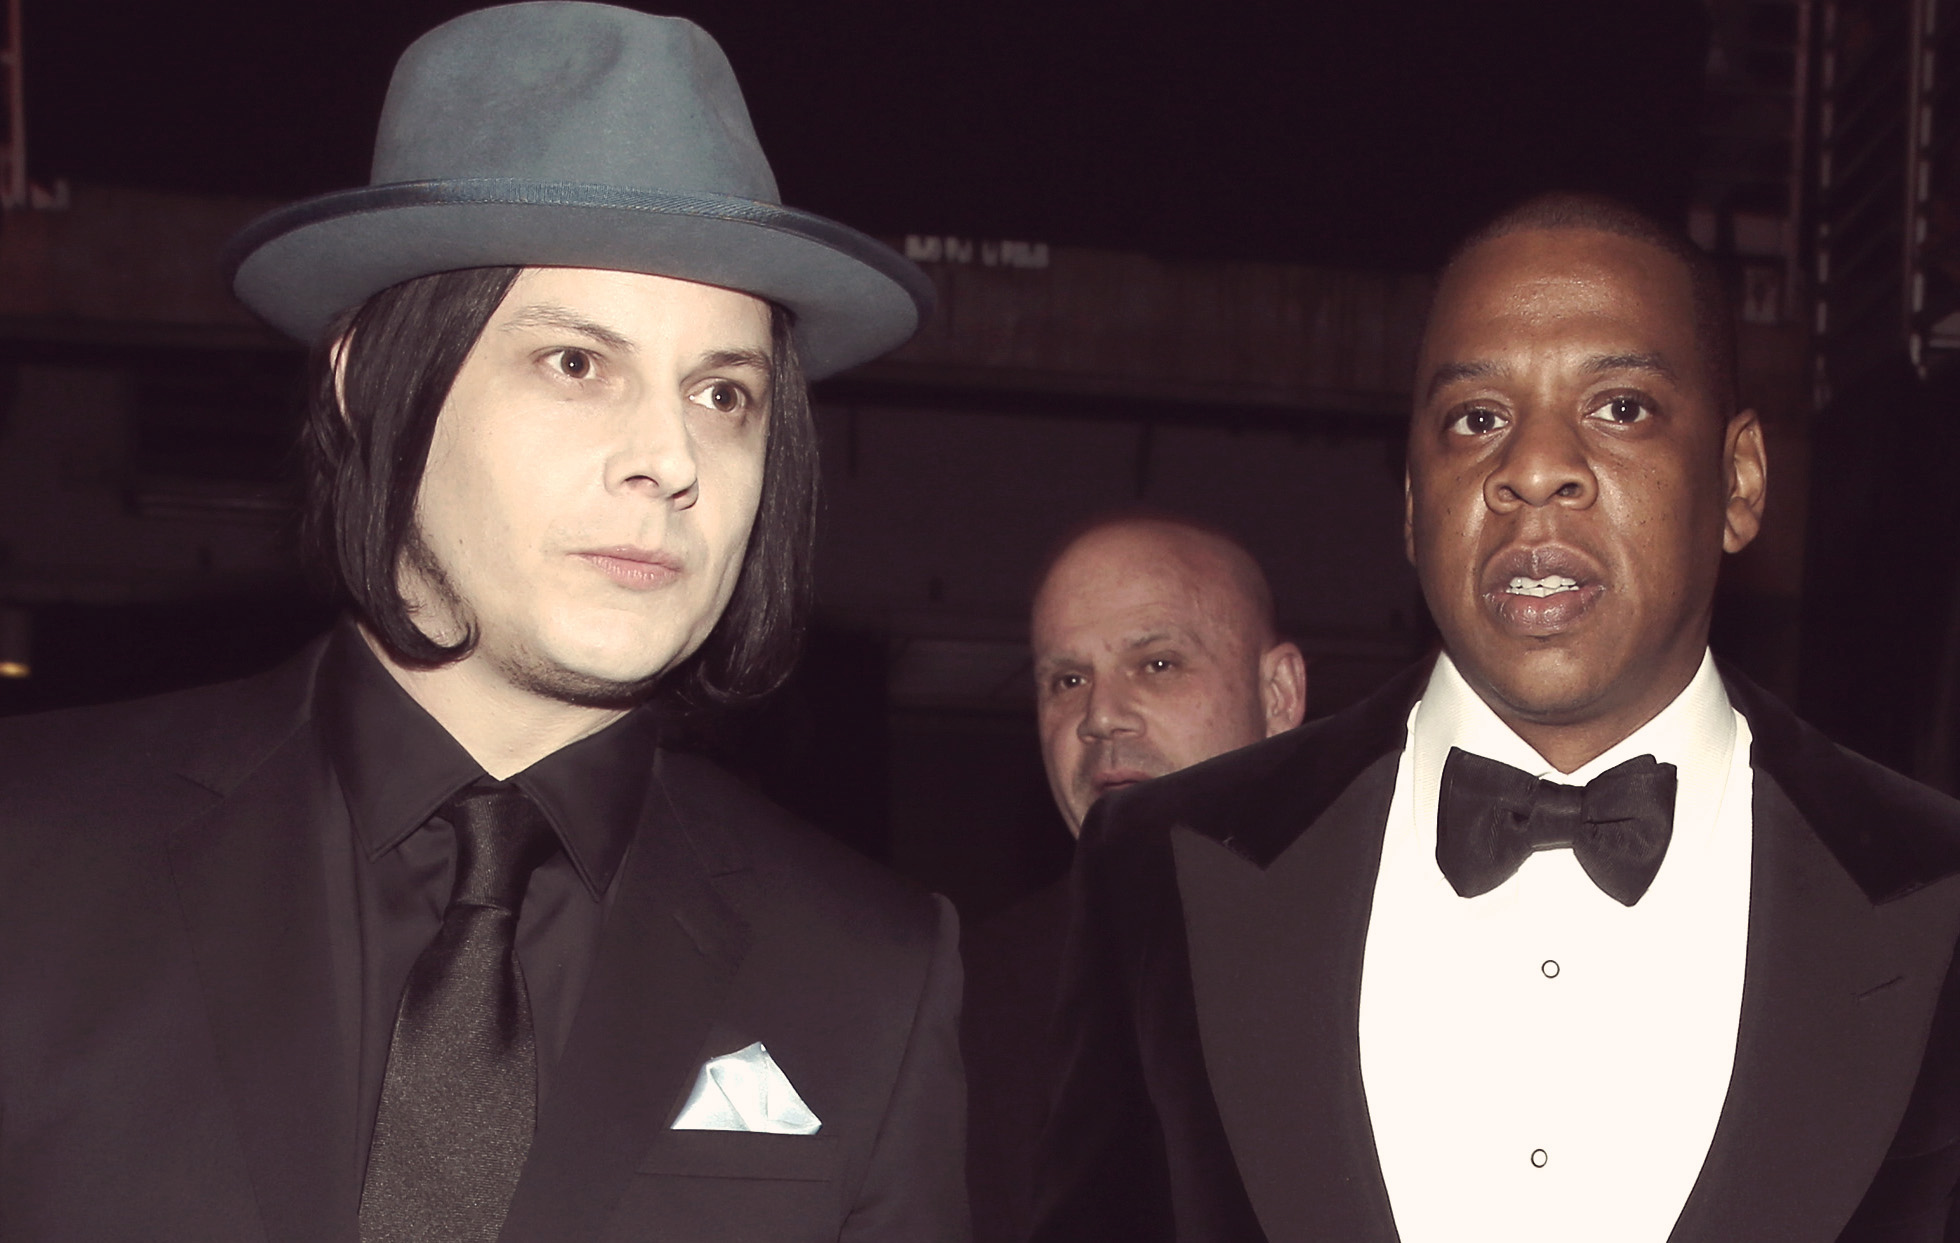 Jack White (L) and Jay-Z (R) attend the 55th Annual GRAMMY Awards